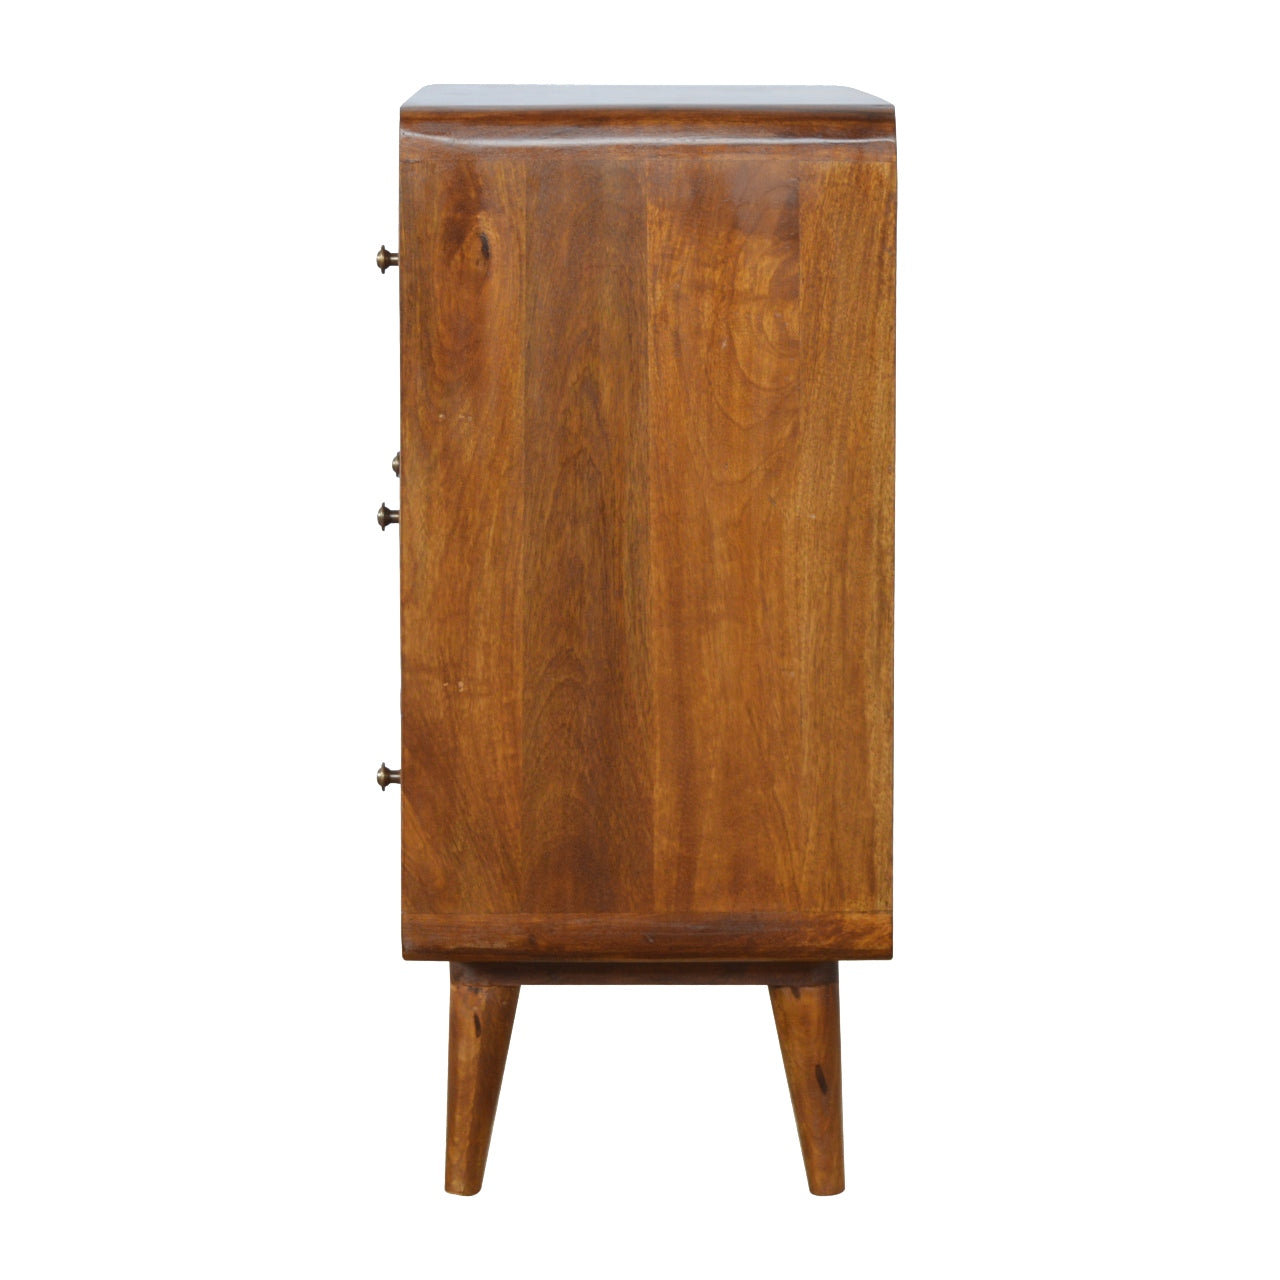 Curved Chestnut Chest by Artisan Furniture